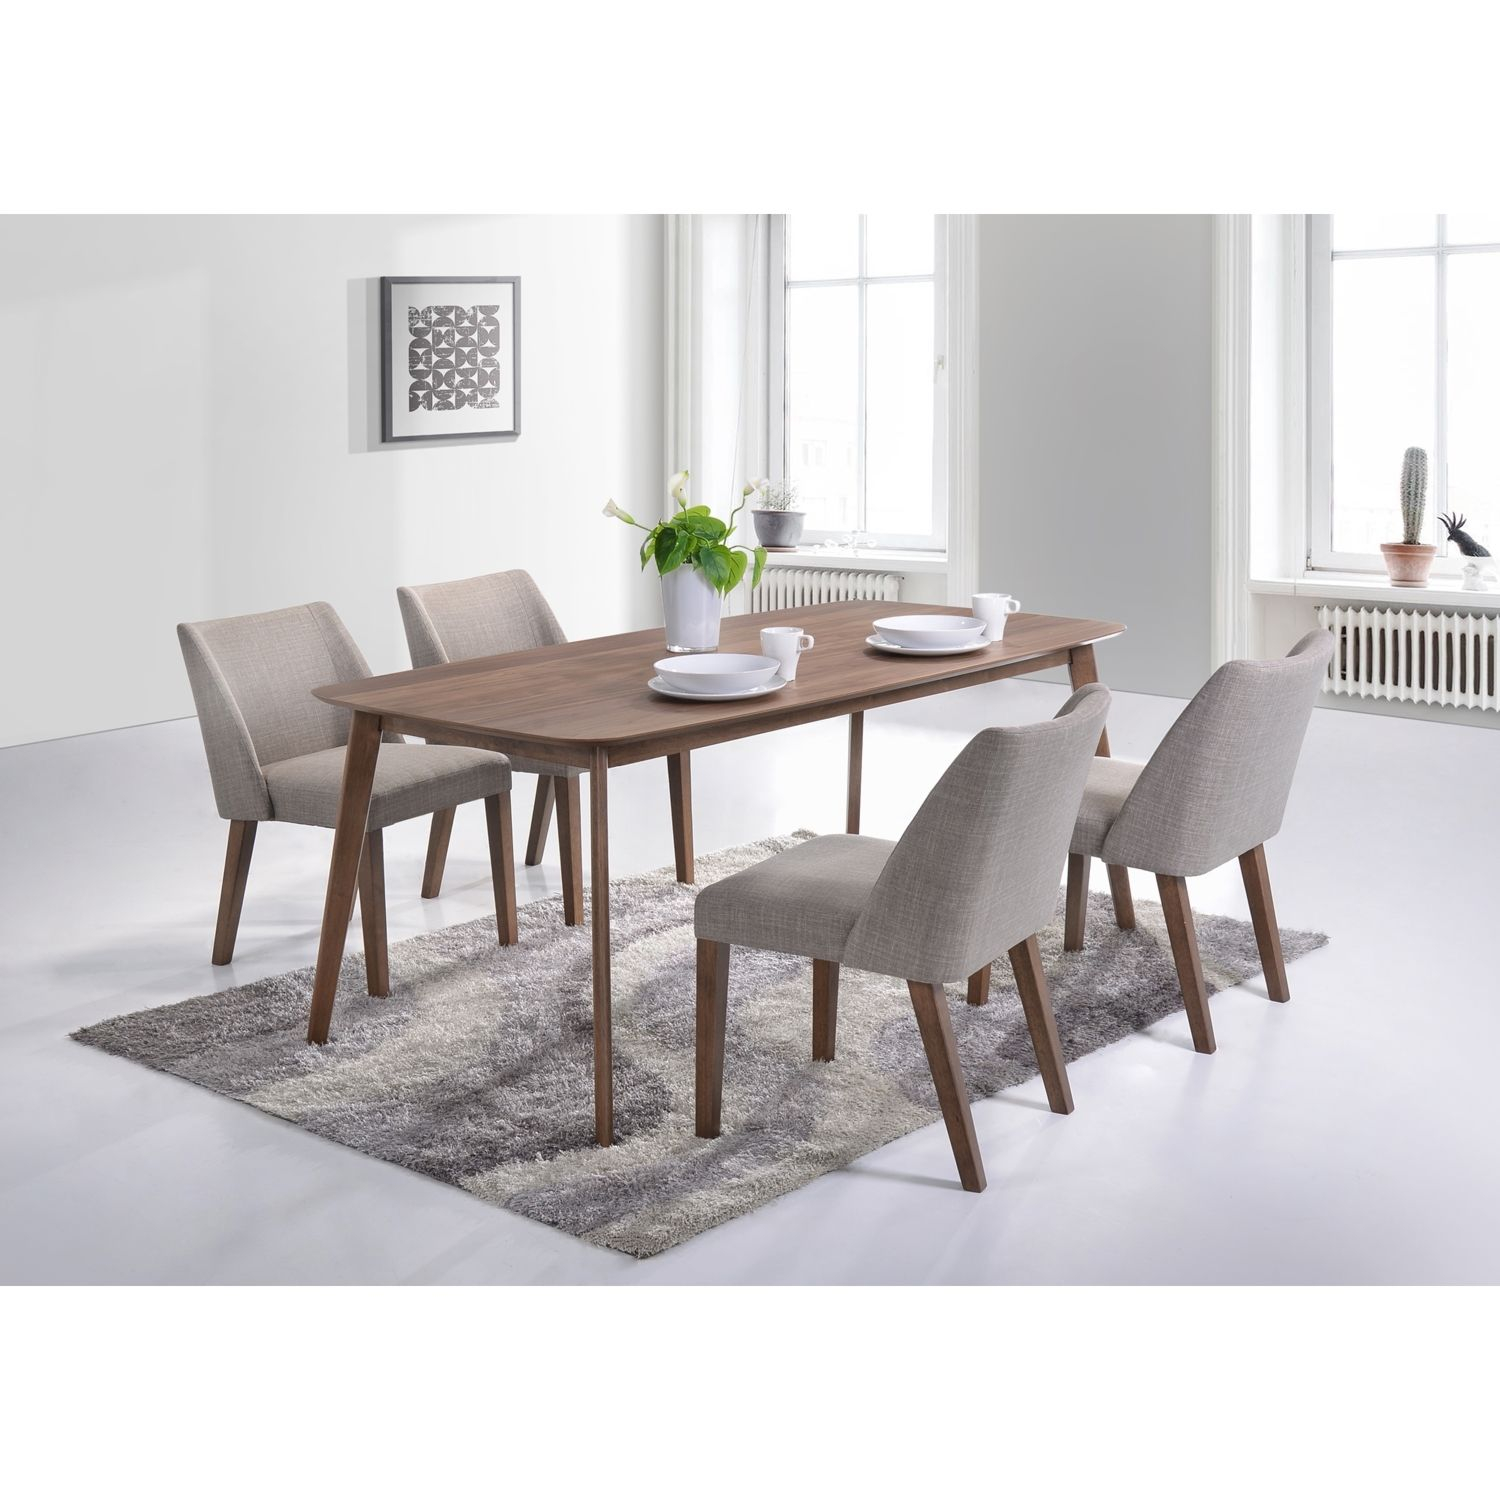 Elba Table And Chairs Set Dining Room Furniture Sets in proportions 1500 X 1500